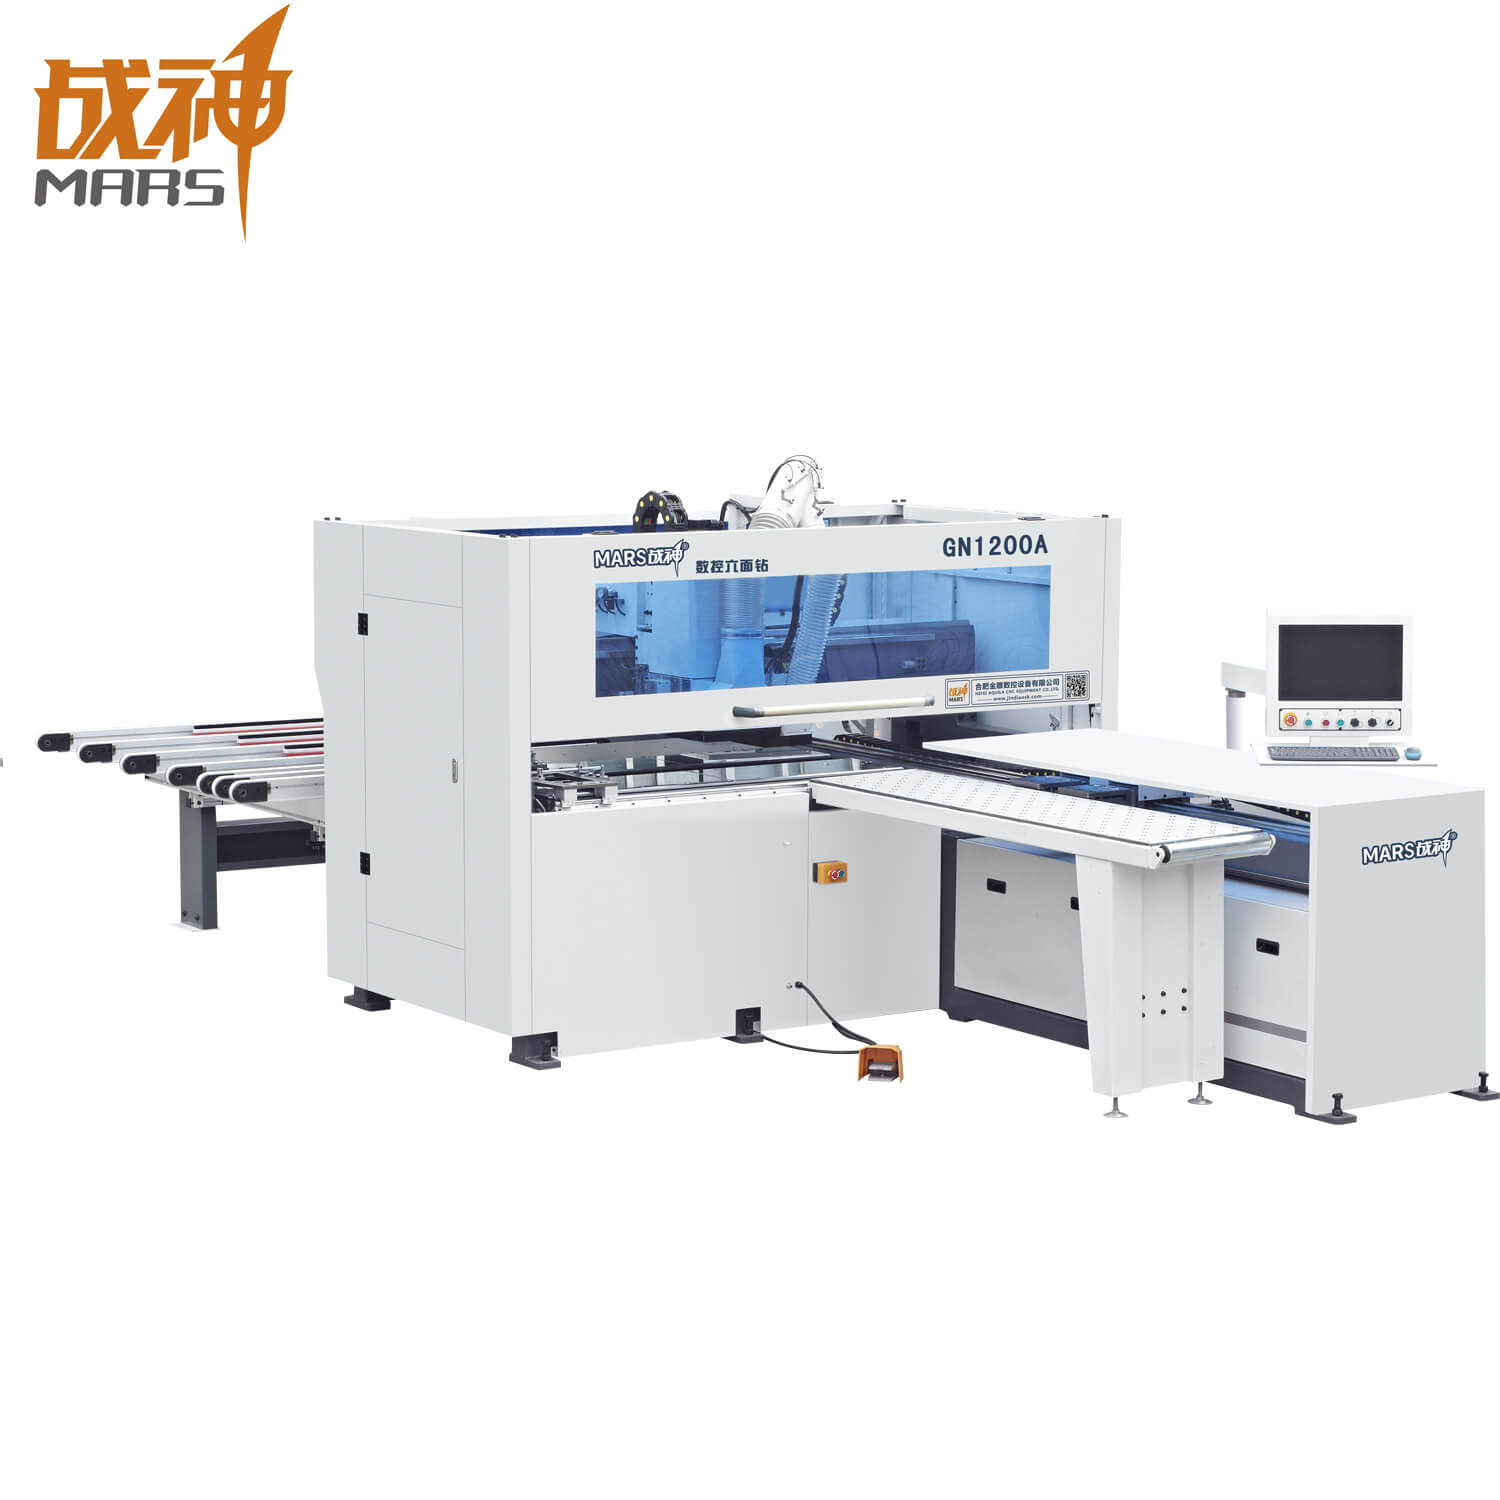 Detailed introduction of CNC six-sided drilling machine